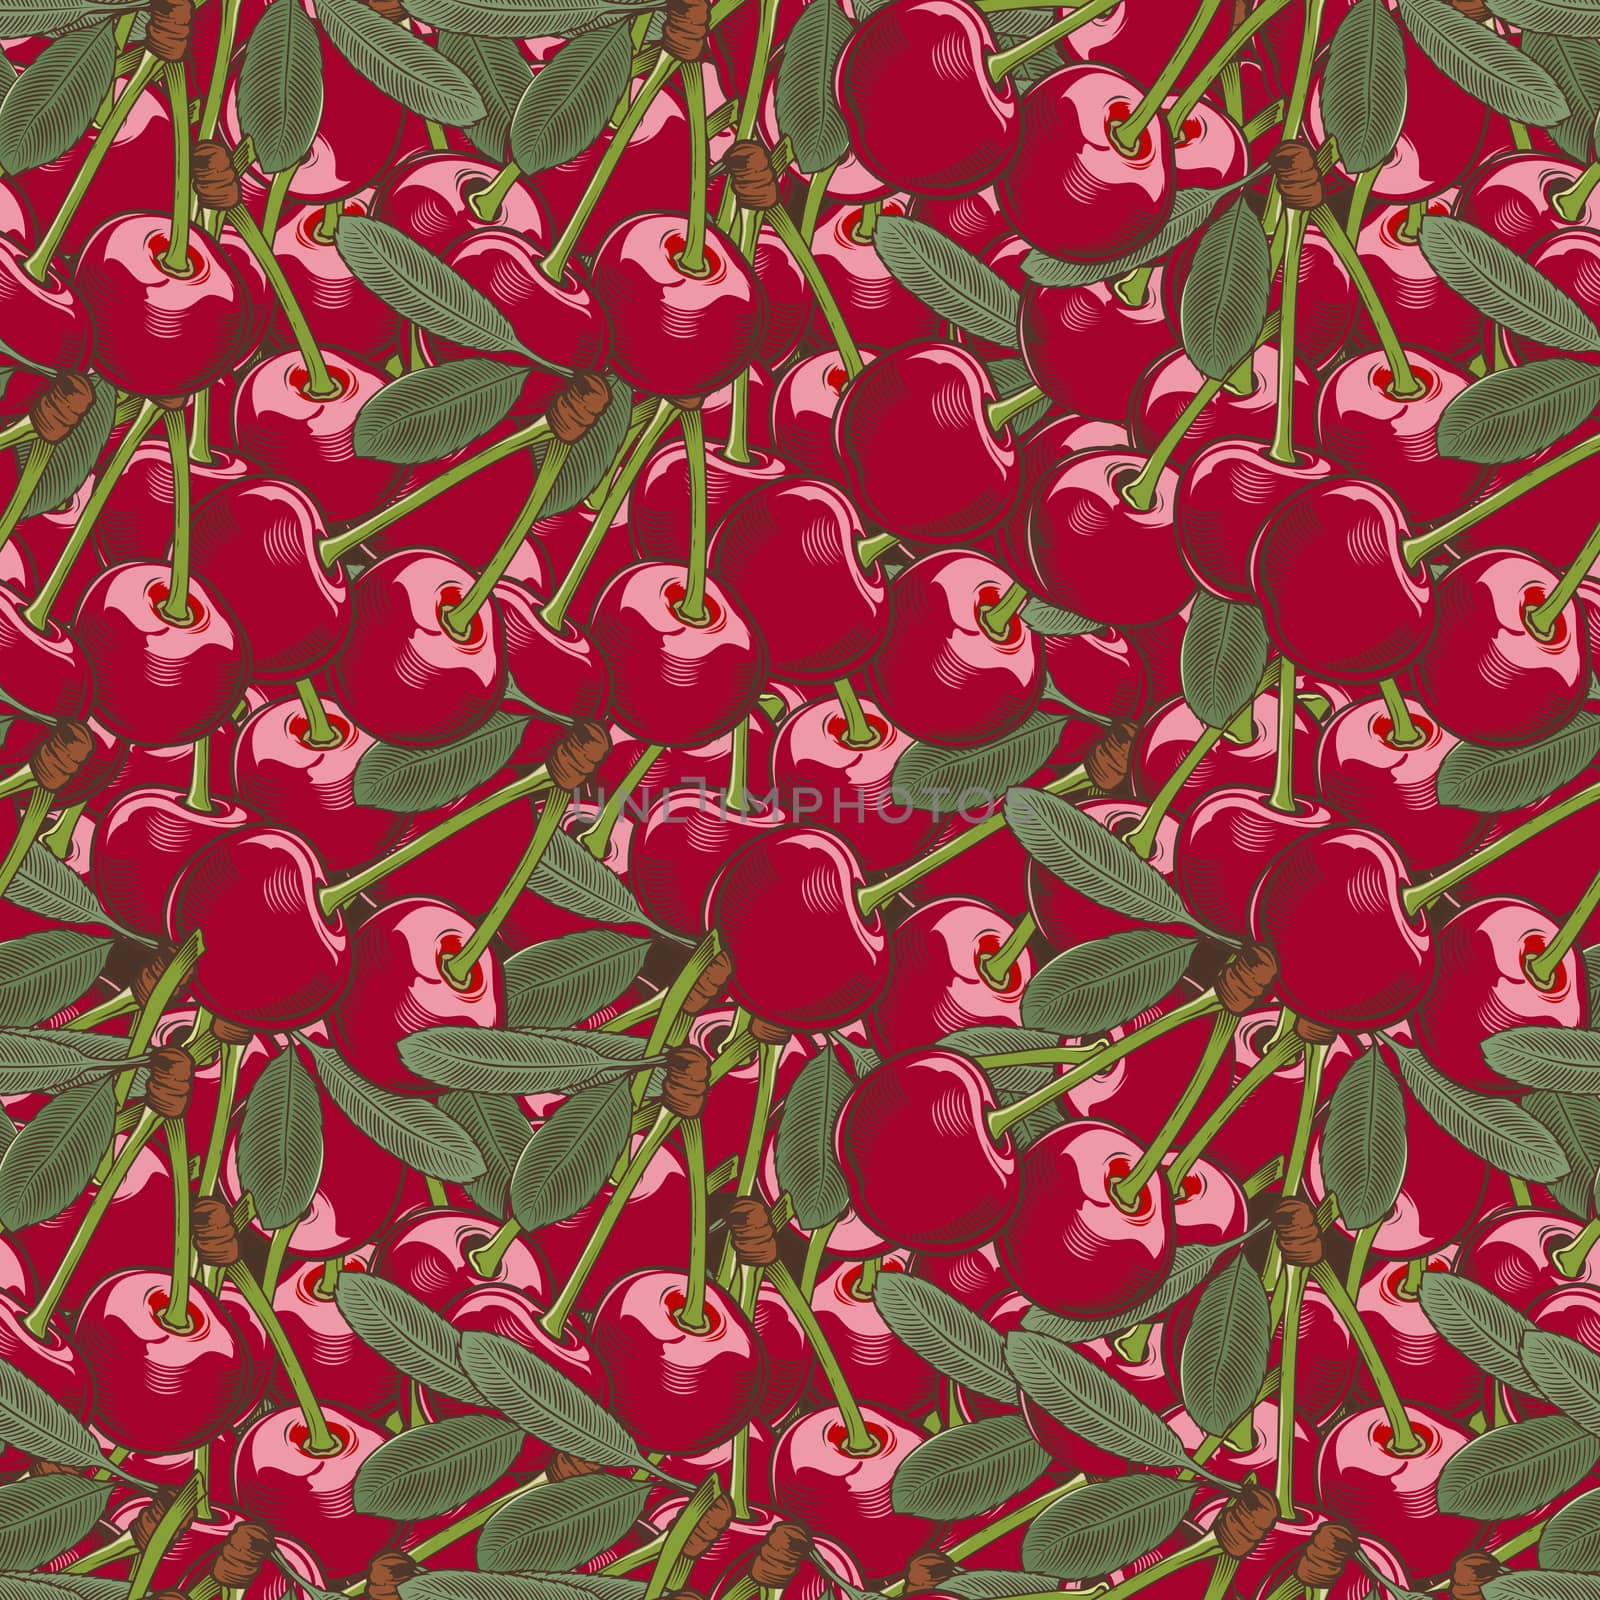 Vintage Cherry Seamless Pattern by ConceptCafe